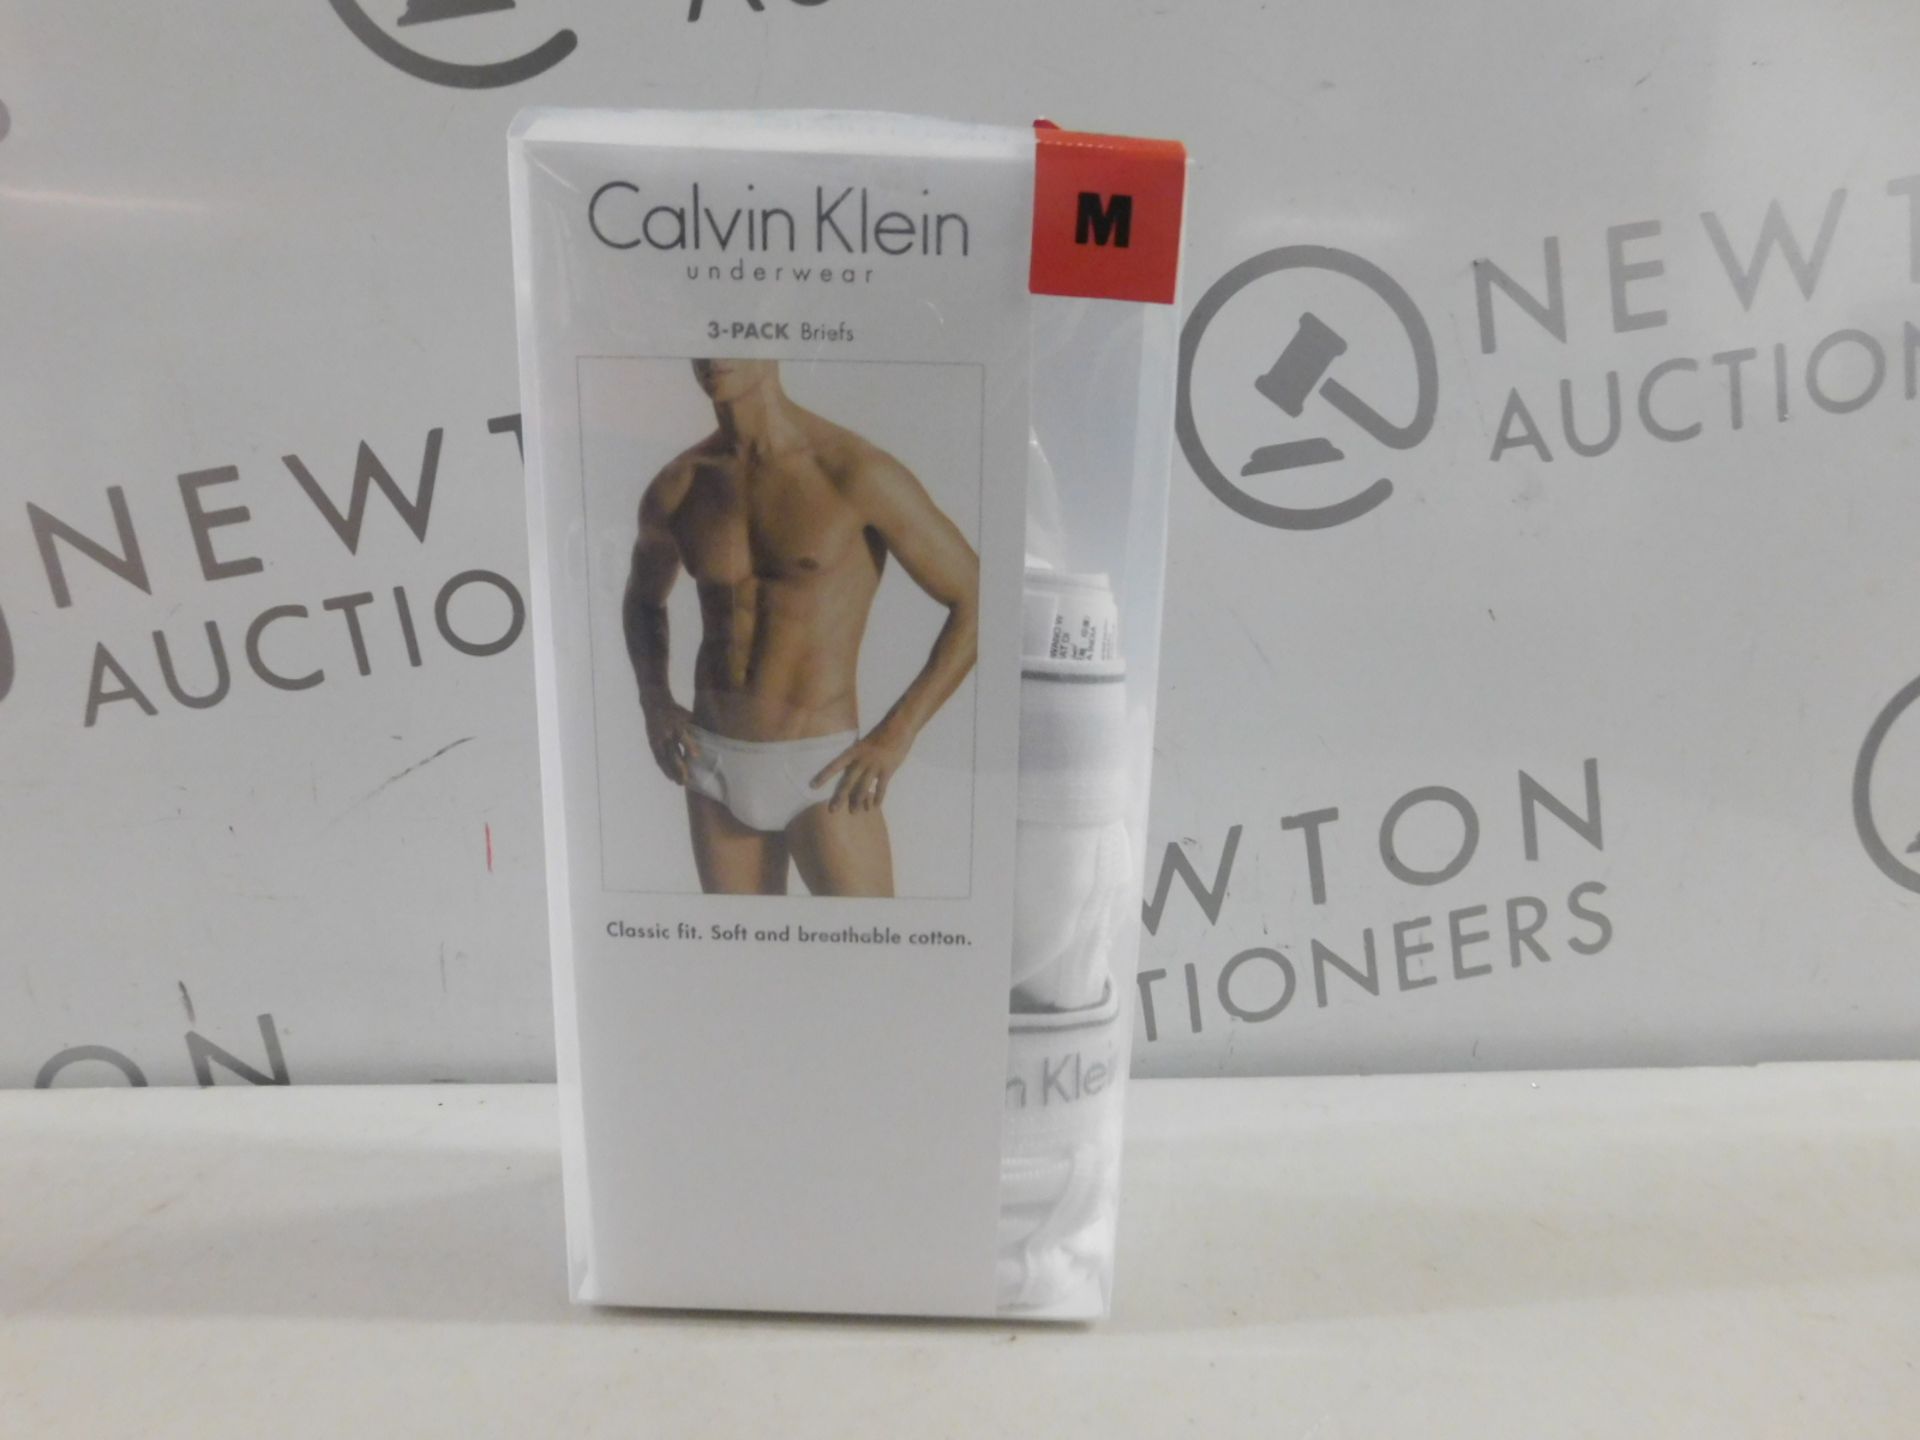 1 BOXED 2 PAIRS OF CALVIN KLEIN CLASSIC FIT BRIEFS RRP £59.99